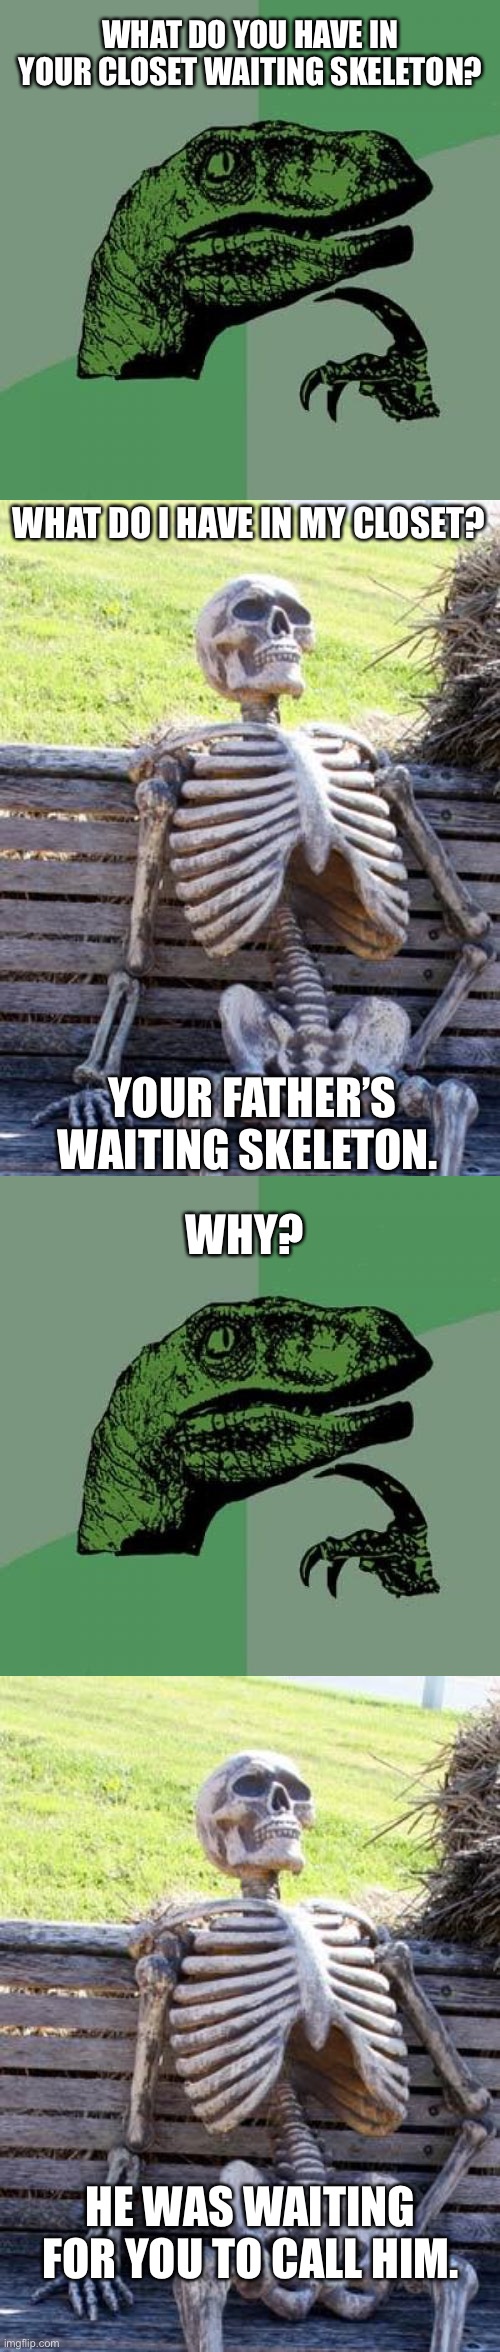 Saw a Meme with the question and decided to make a meme responding. | WHAT DO YOU HAVE IN YOUR CLOSET WAITING SKELETON? WHAT DO I HAVE IN MY CLOSET? YOUR FATHER’S WAITING SKELETON. WHY? HE WAS WAITING FOR YOU TO CALL HIM. | image tagged in memes,philosoraptor,waiting skeleton | made w/ Imgflip meme maker